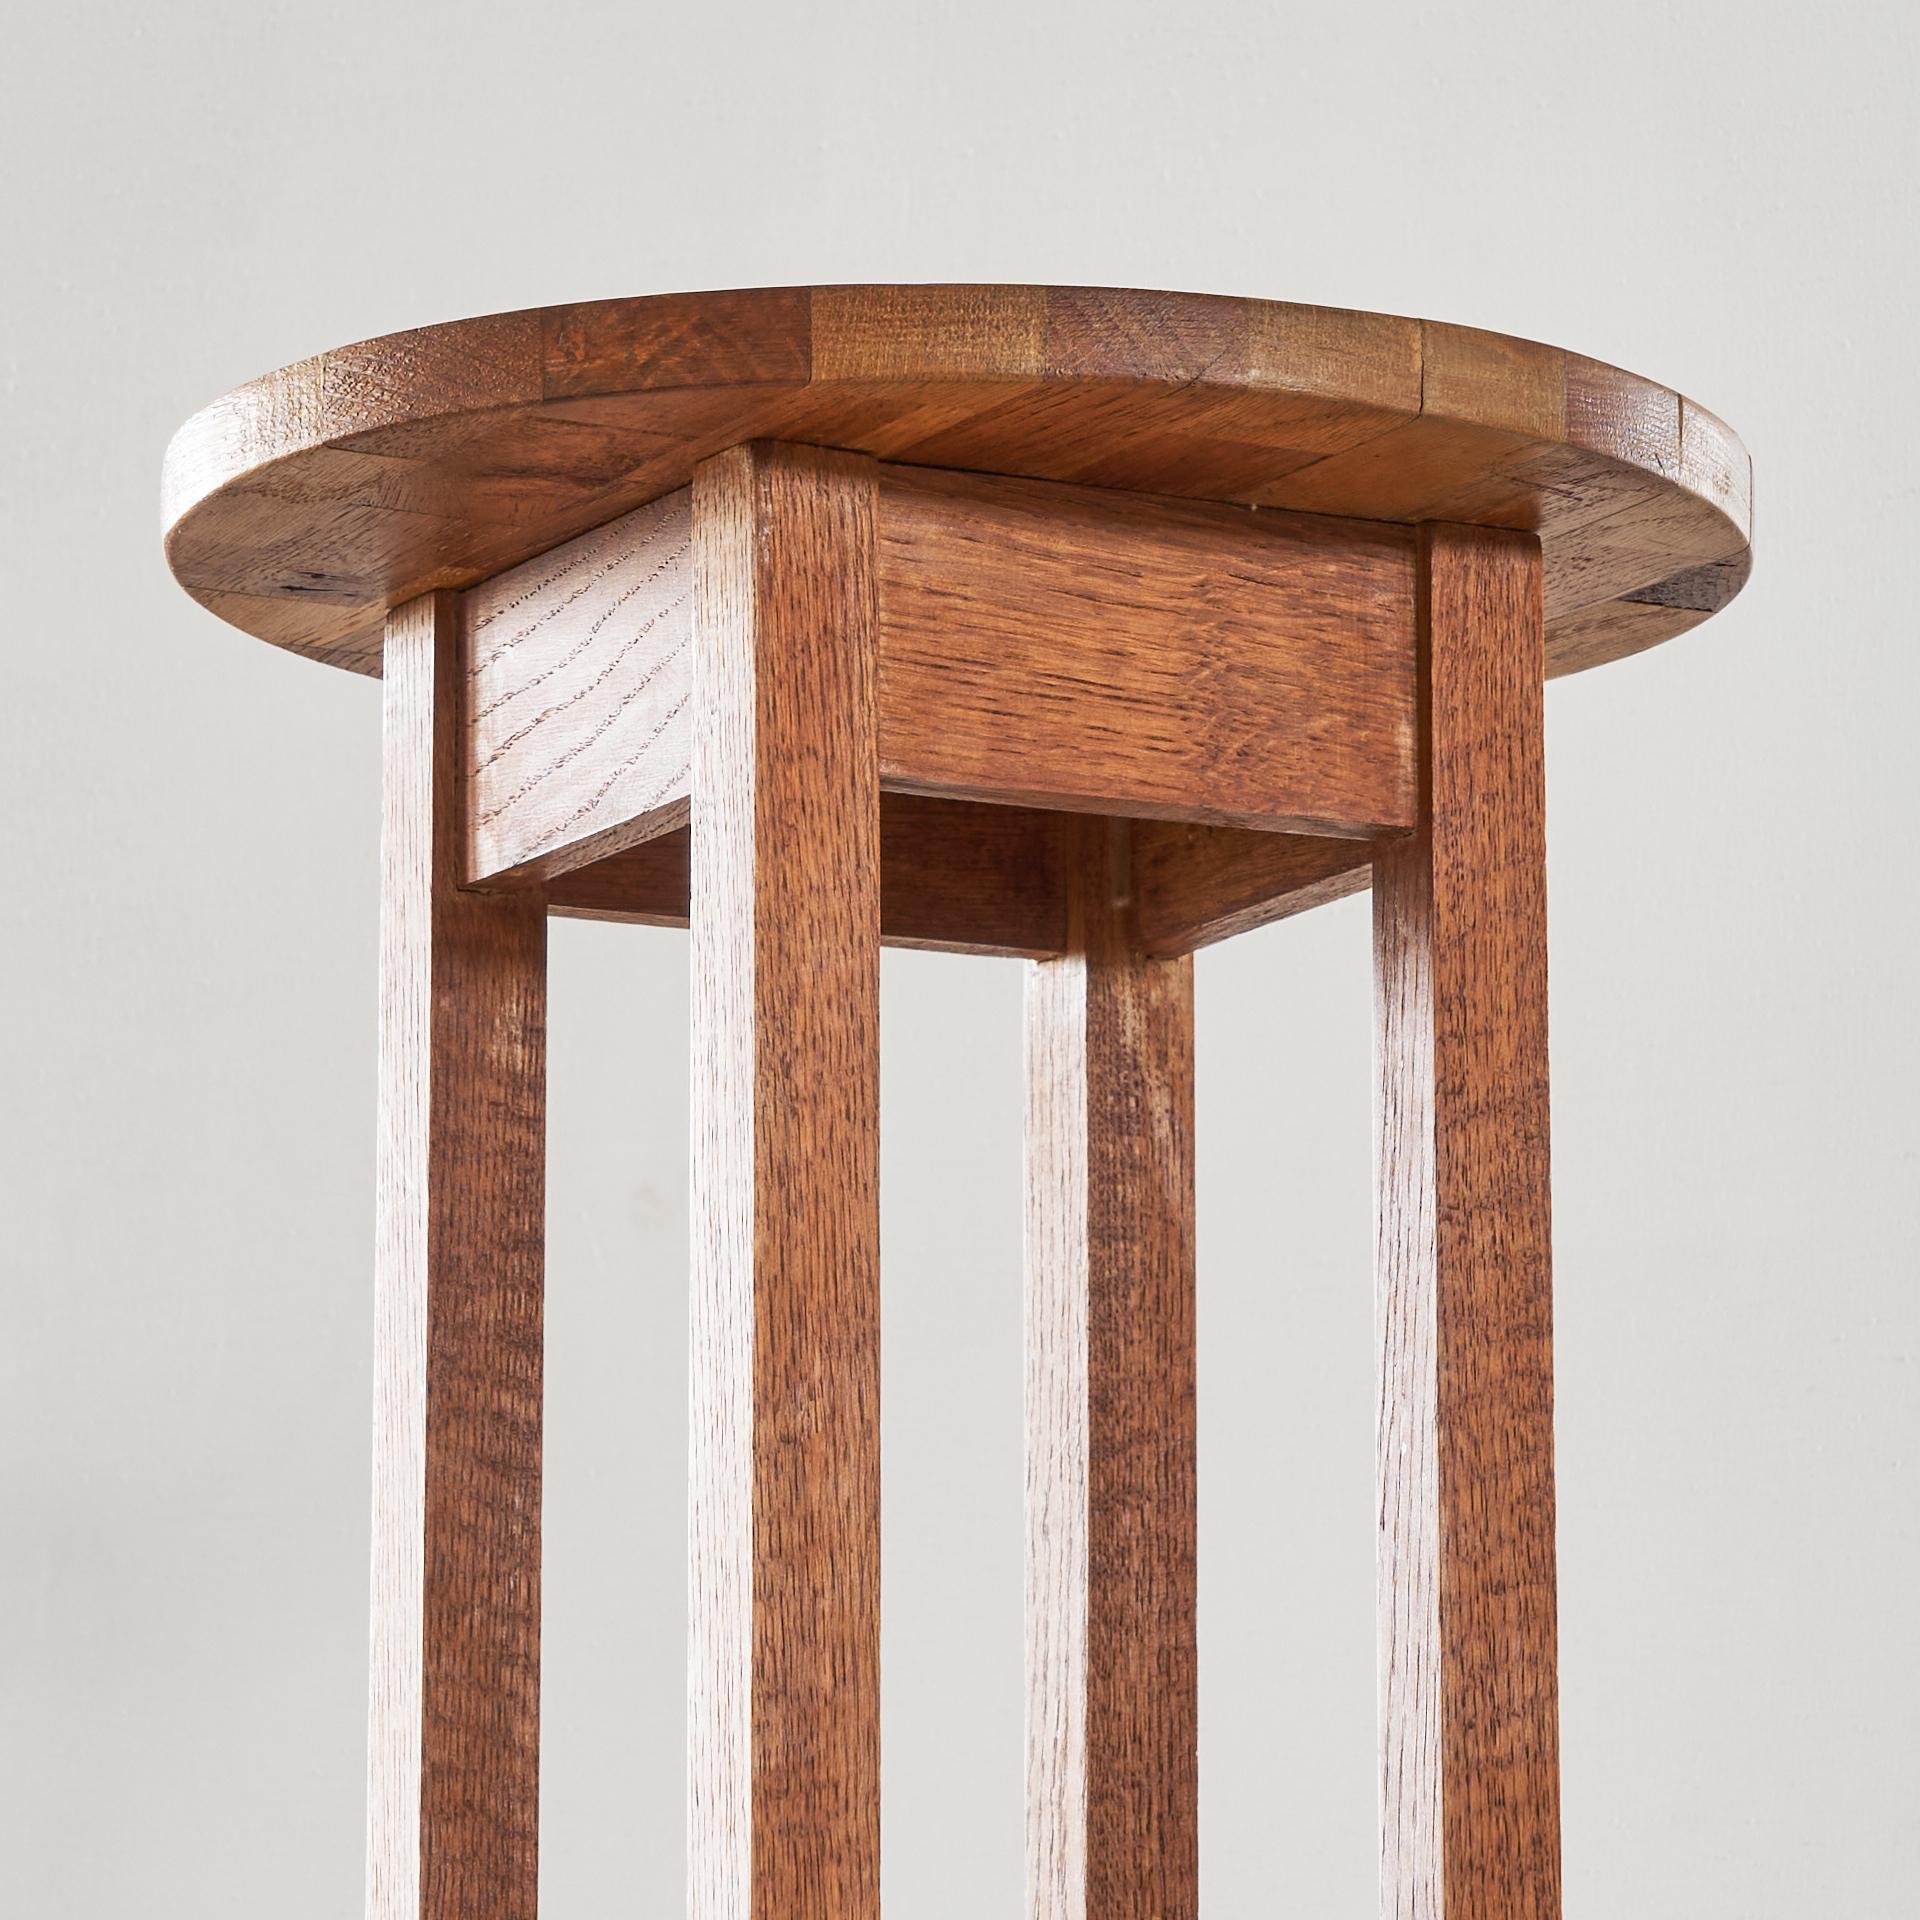 Wood Art Deco Gueridon or Pedestal Table 1950s For Sale